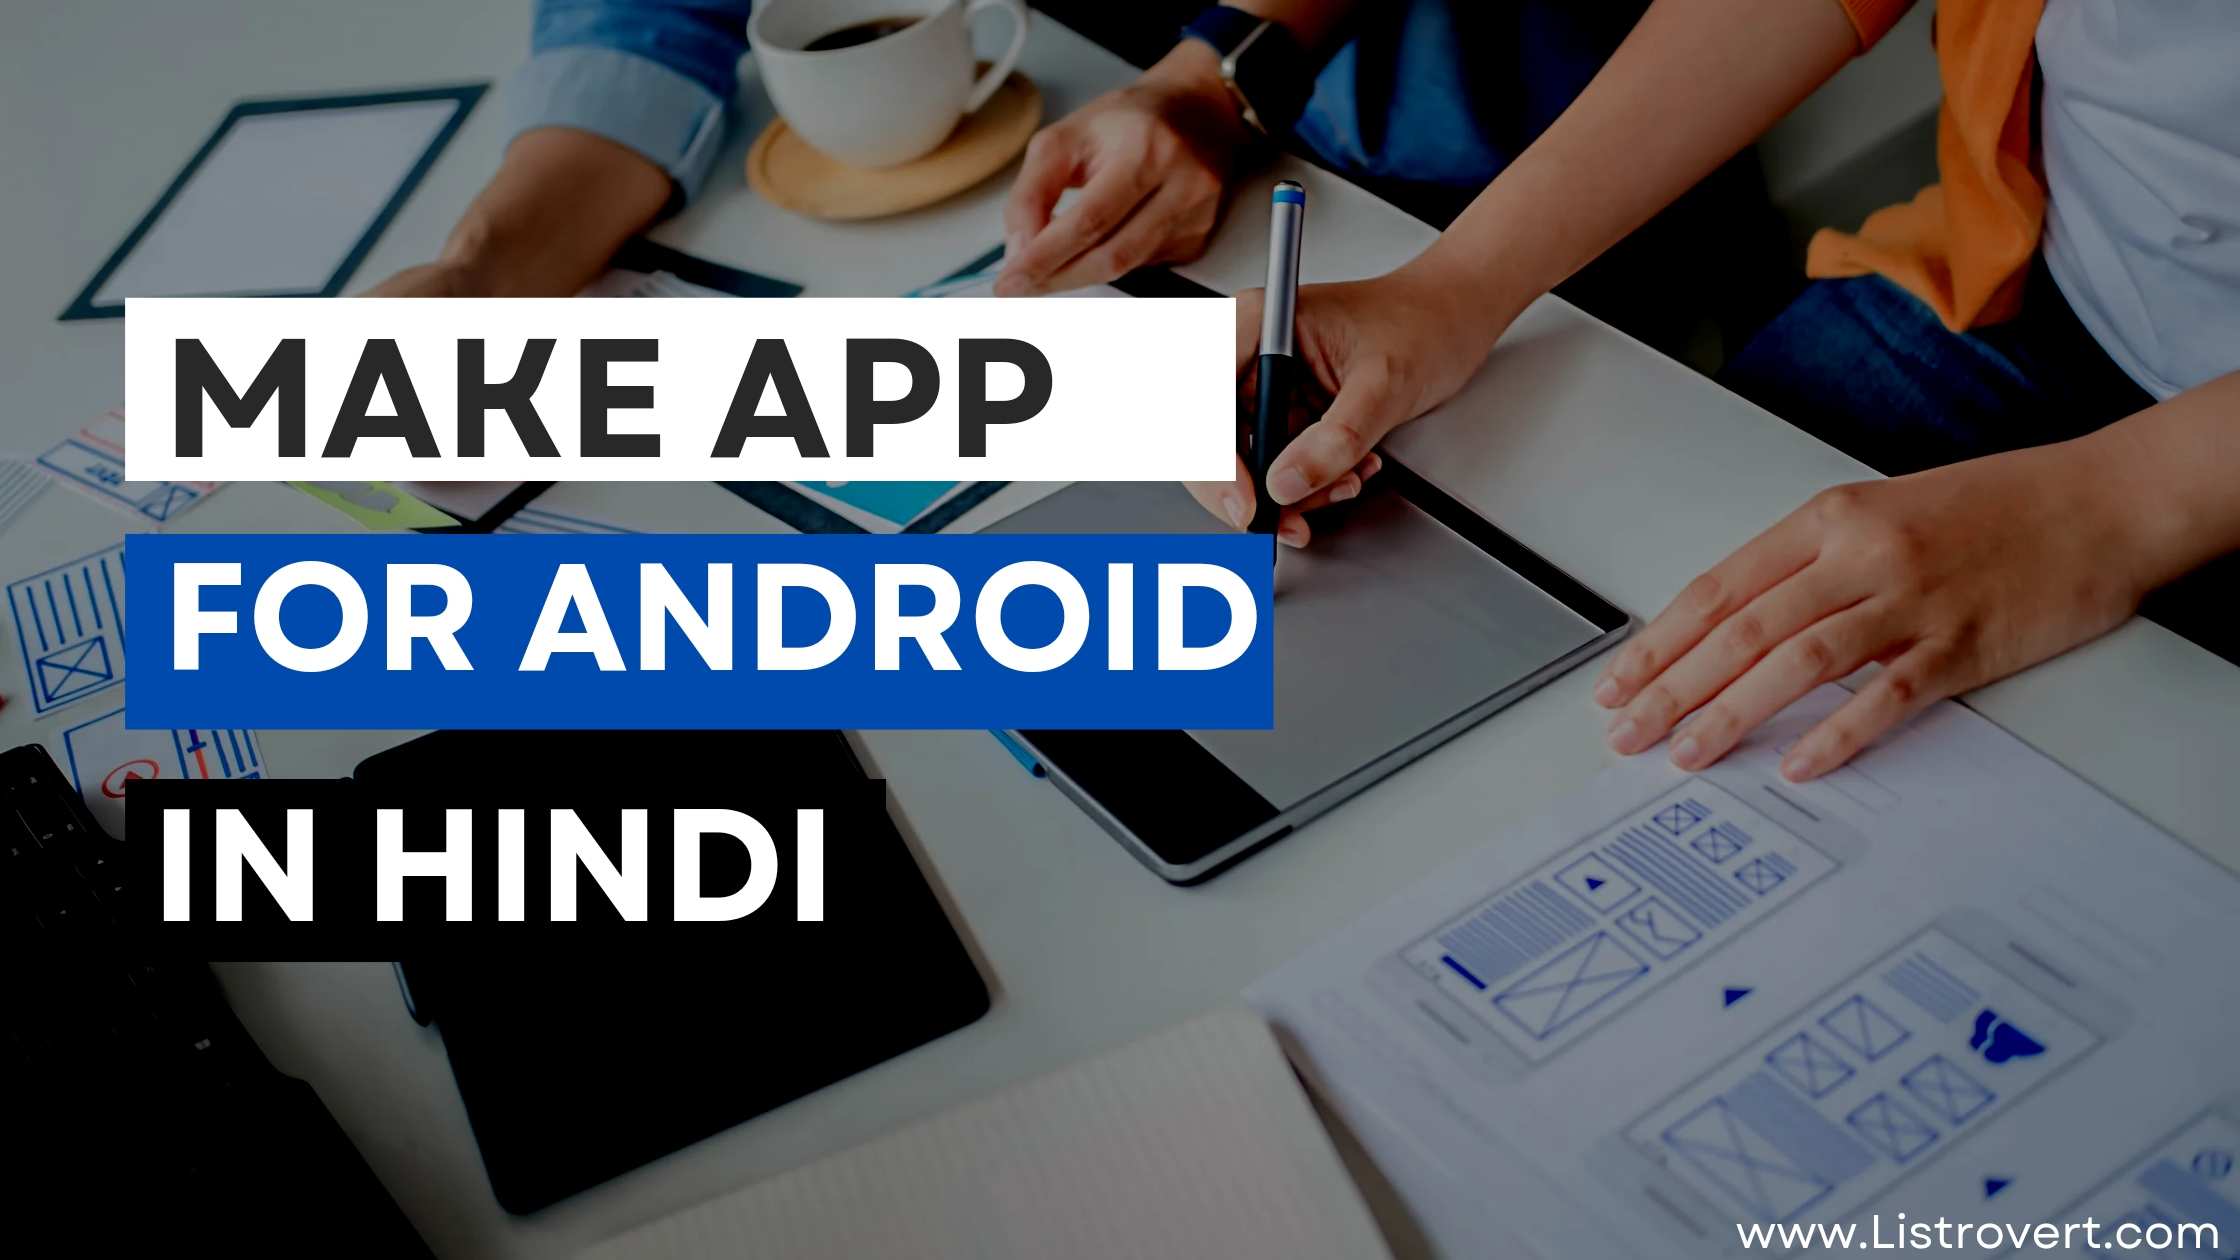 How to Make App for Android Free in Hindi